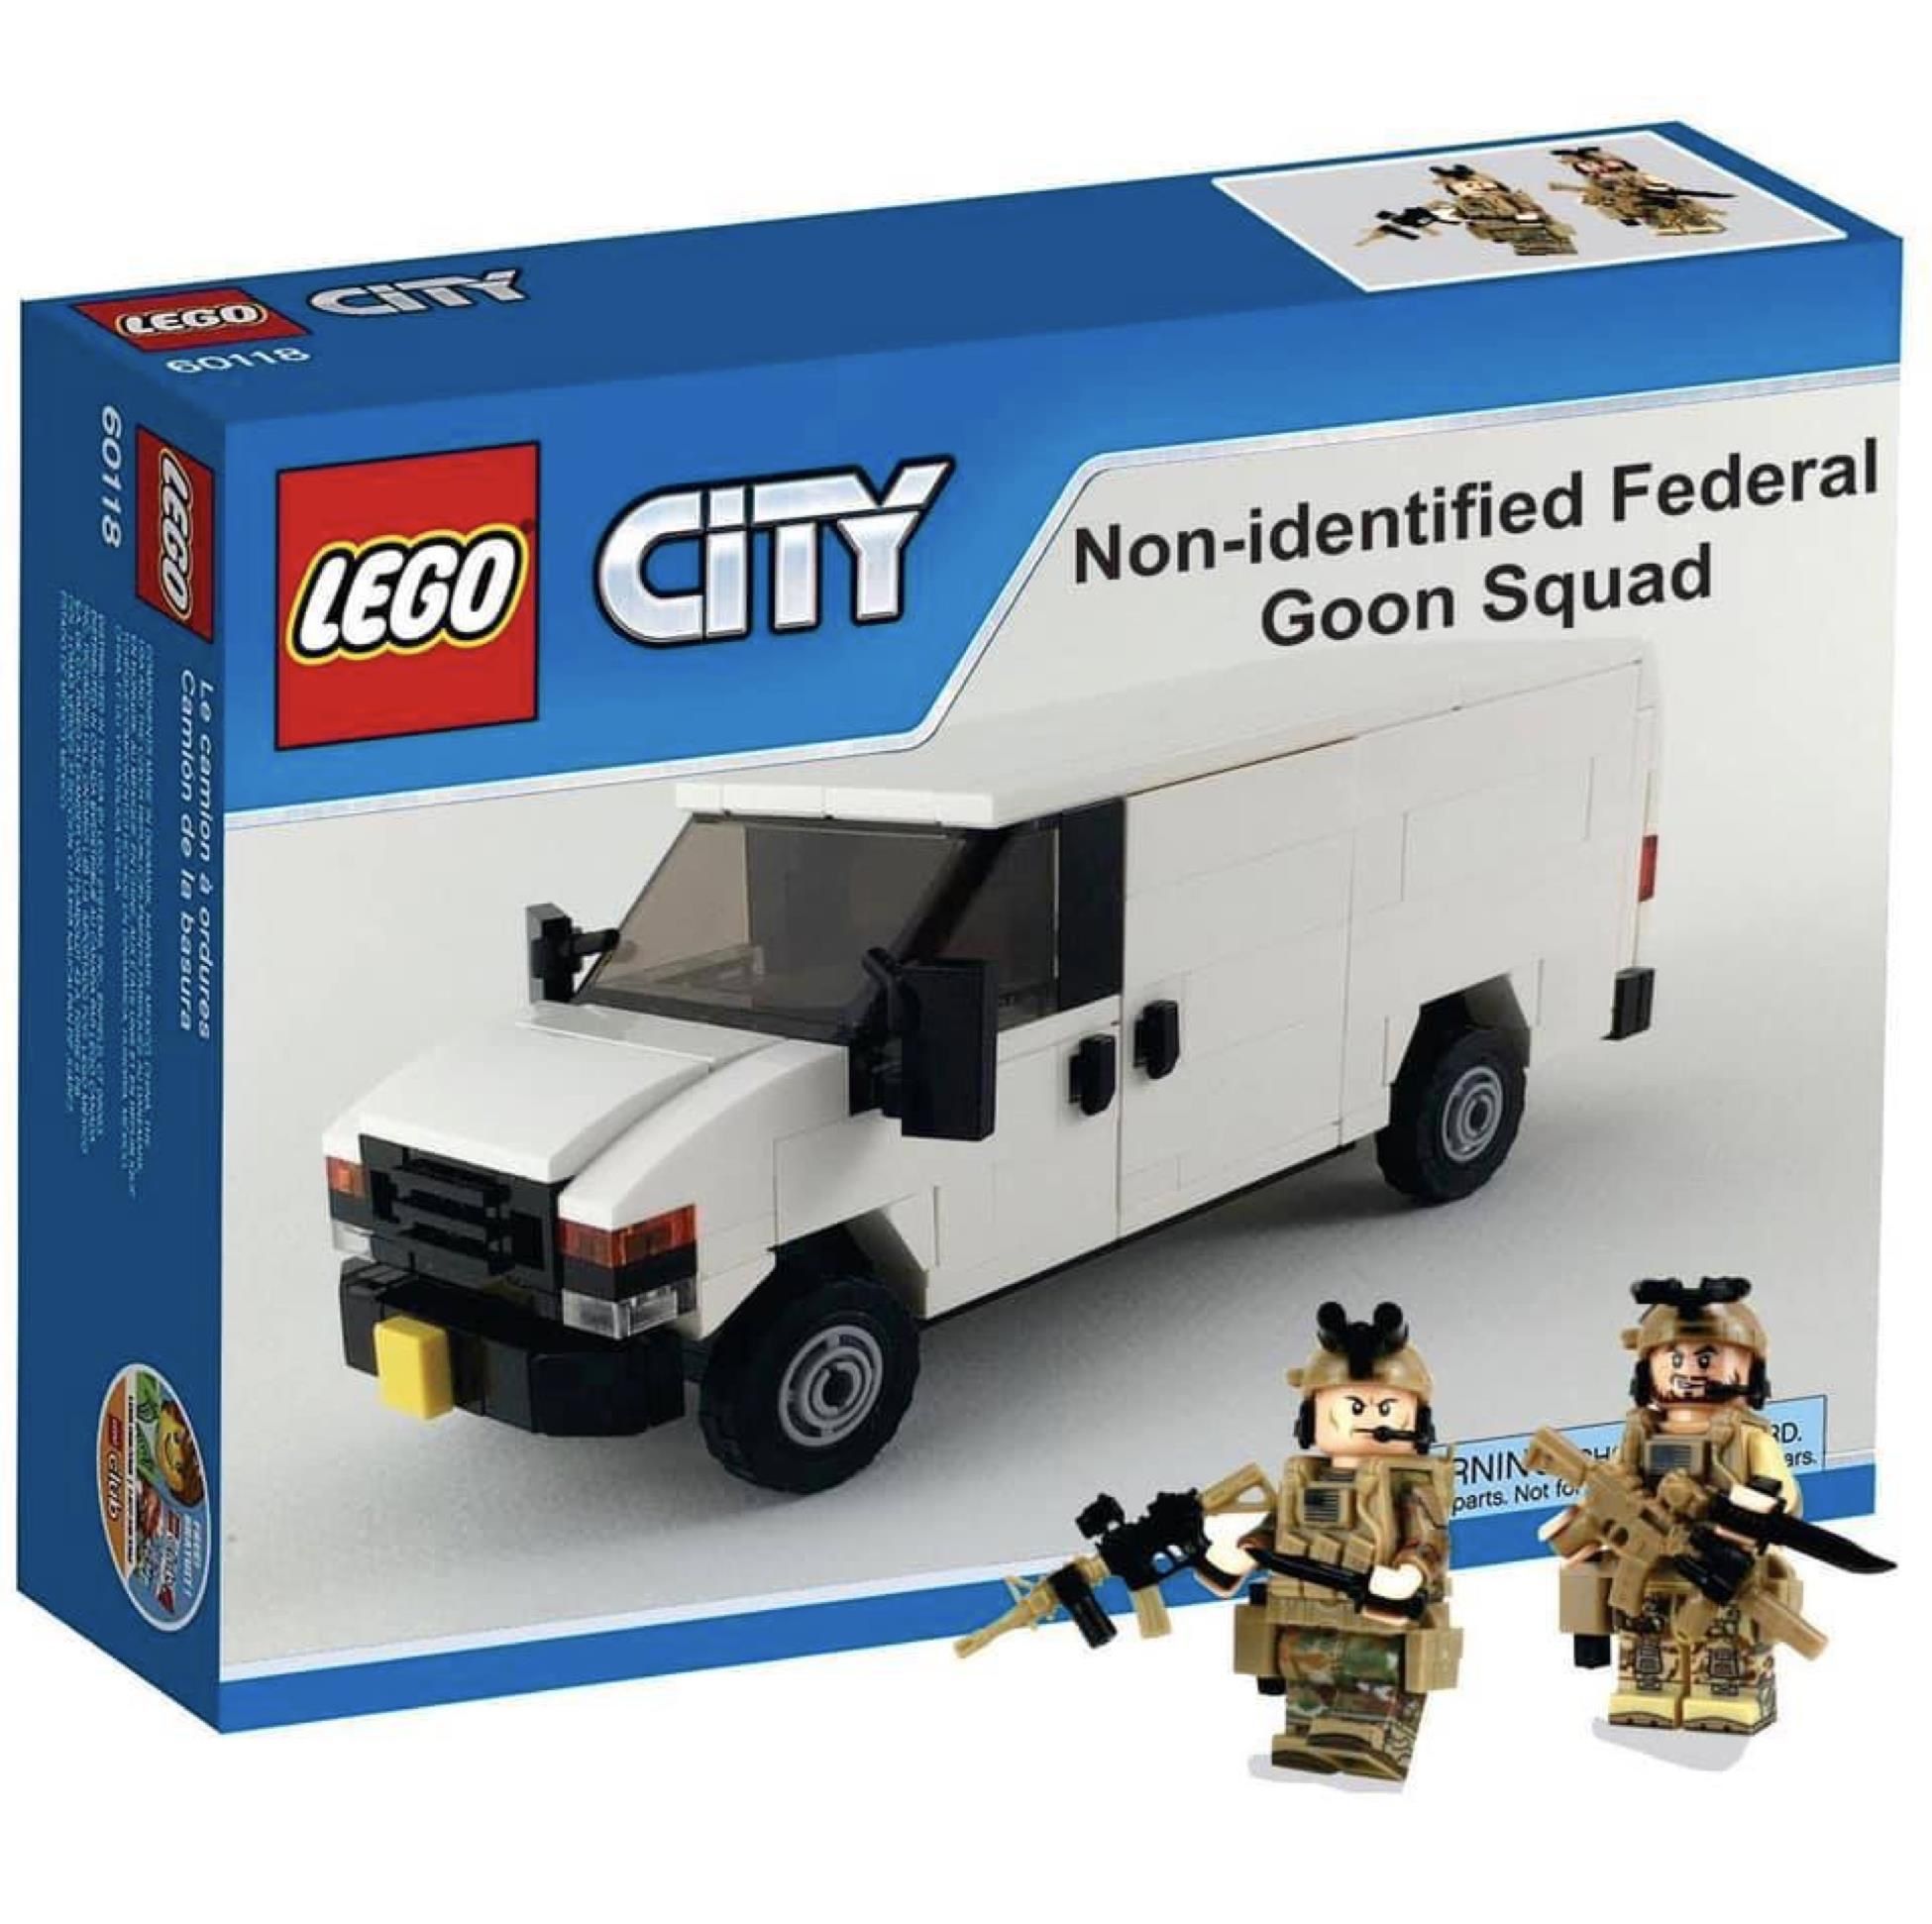 New for the 2020 Lego collection